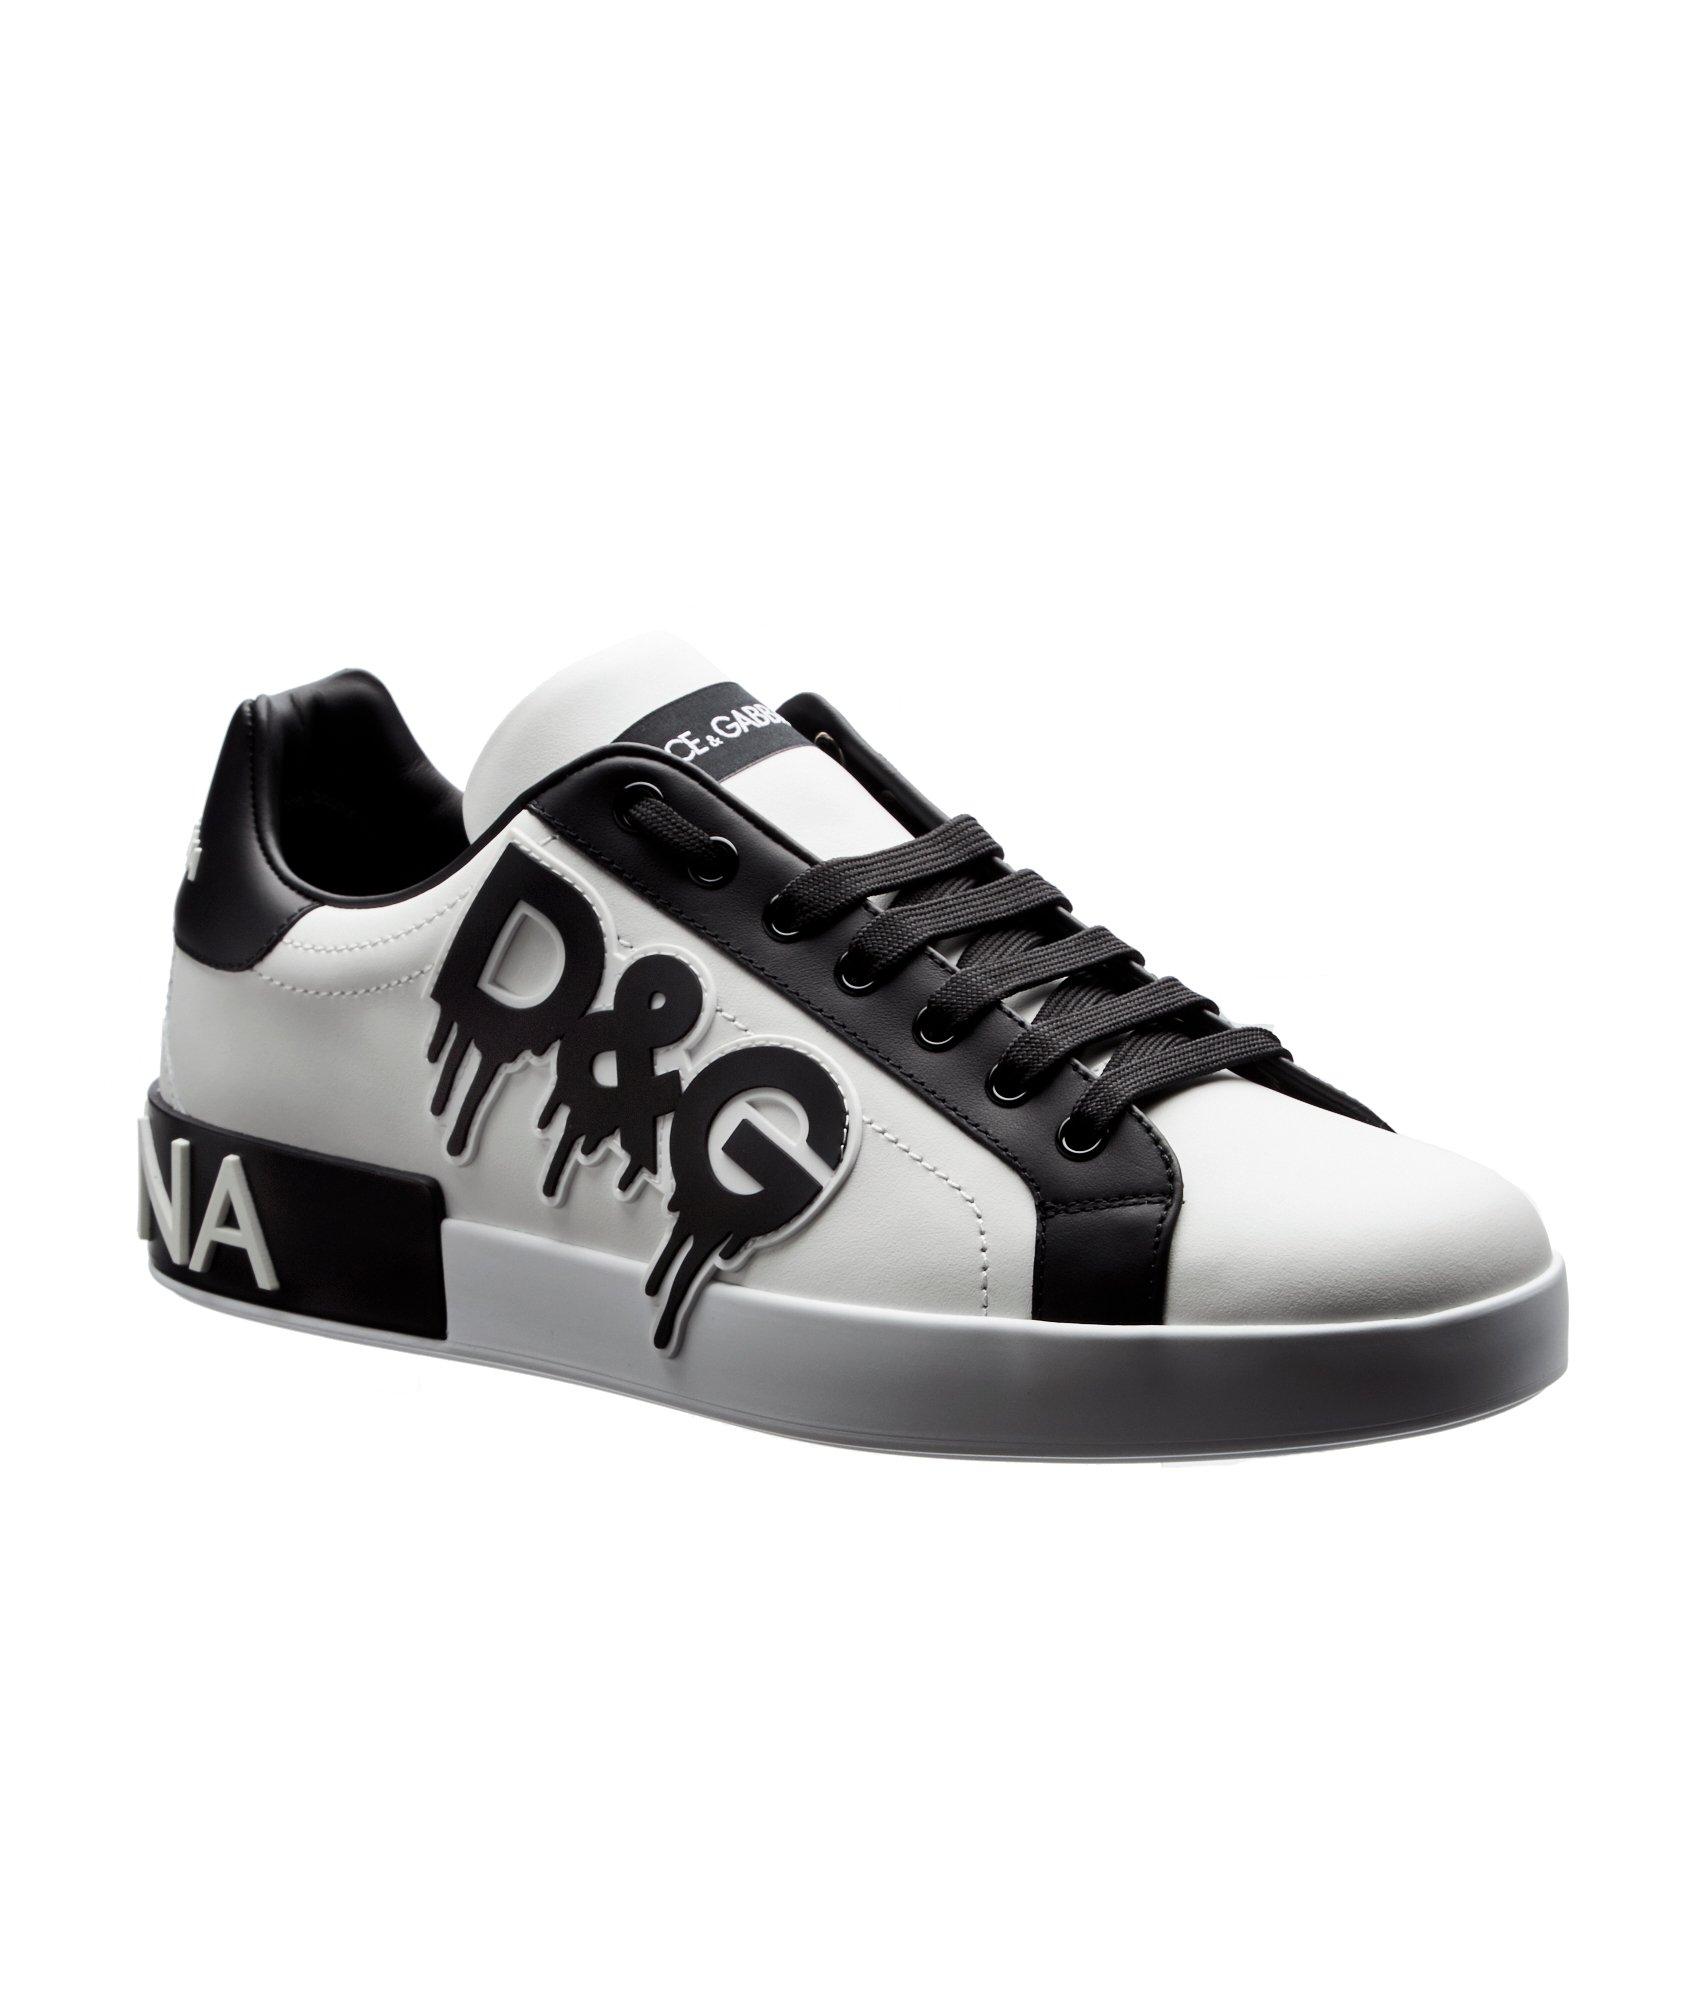 Bassa Leather Low-Top Sneakers image 0